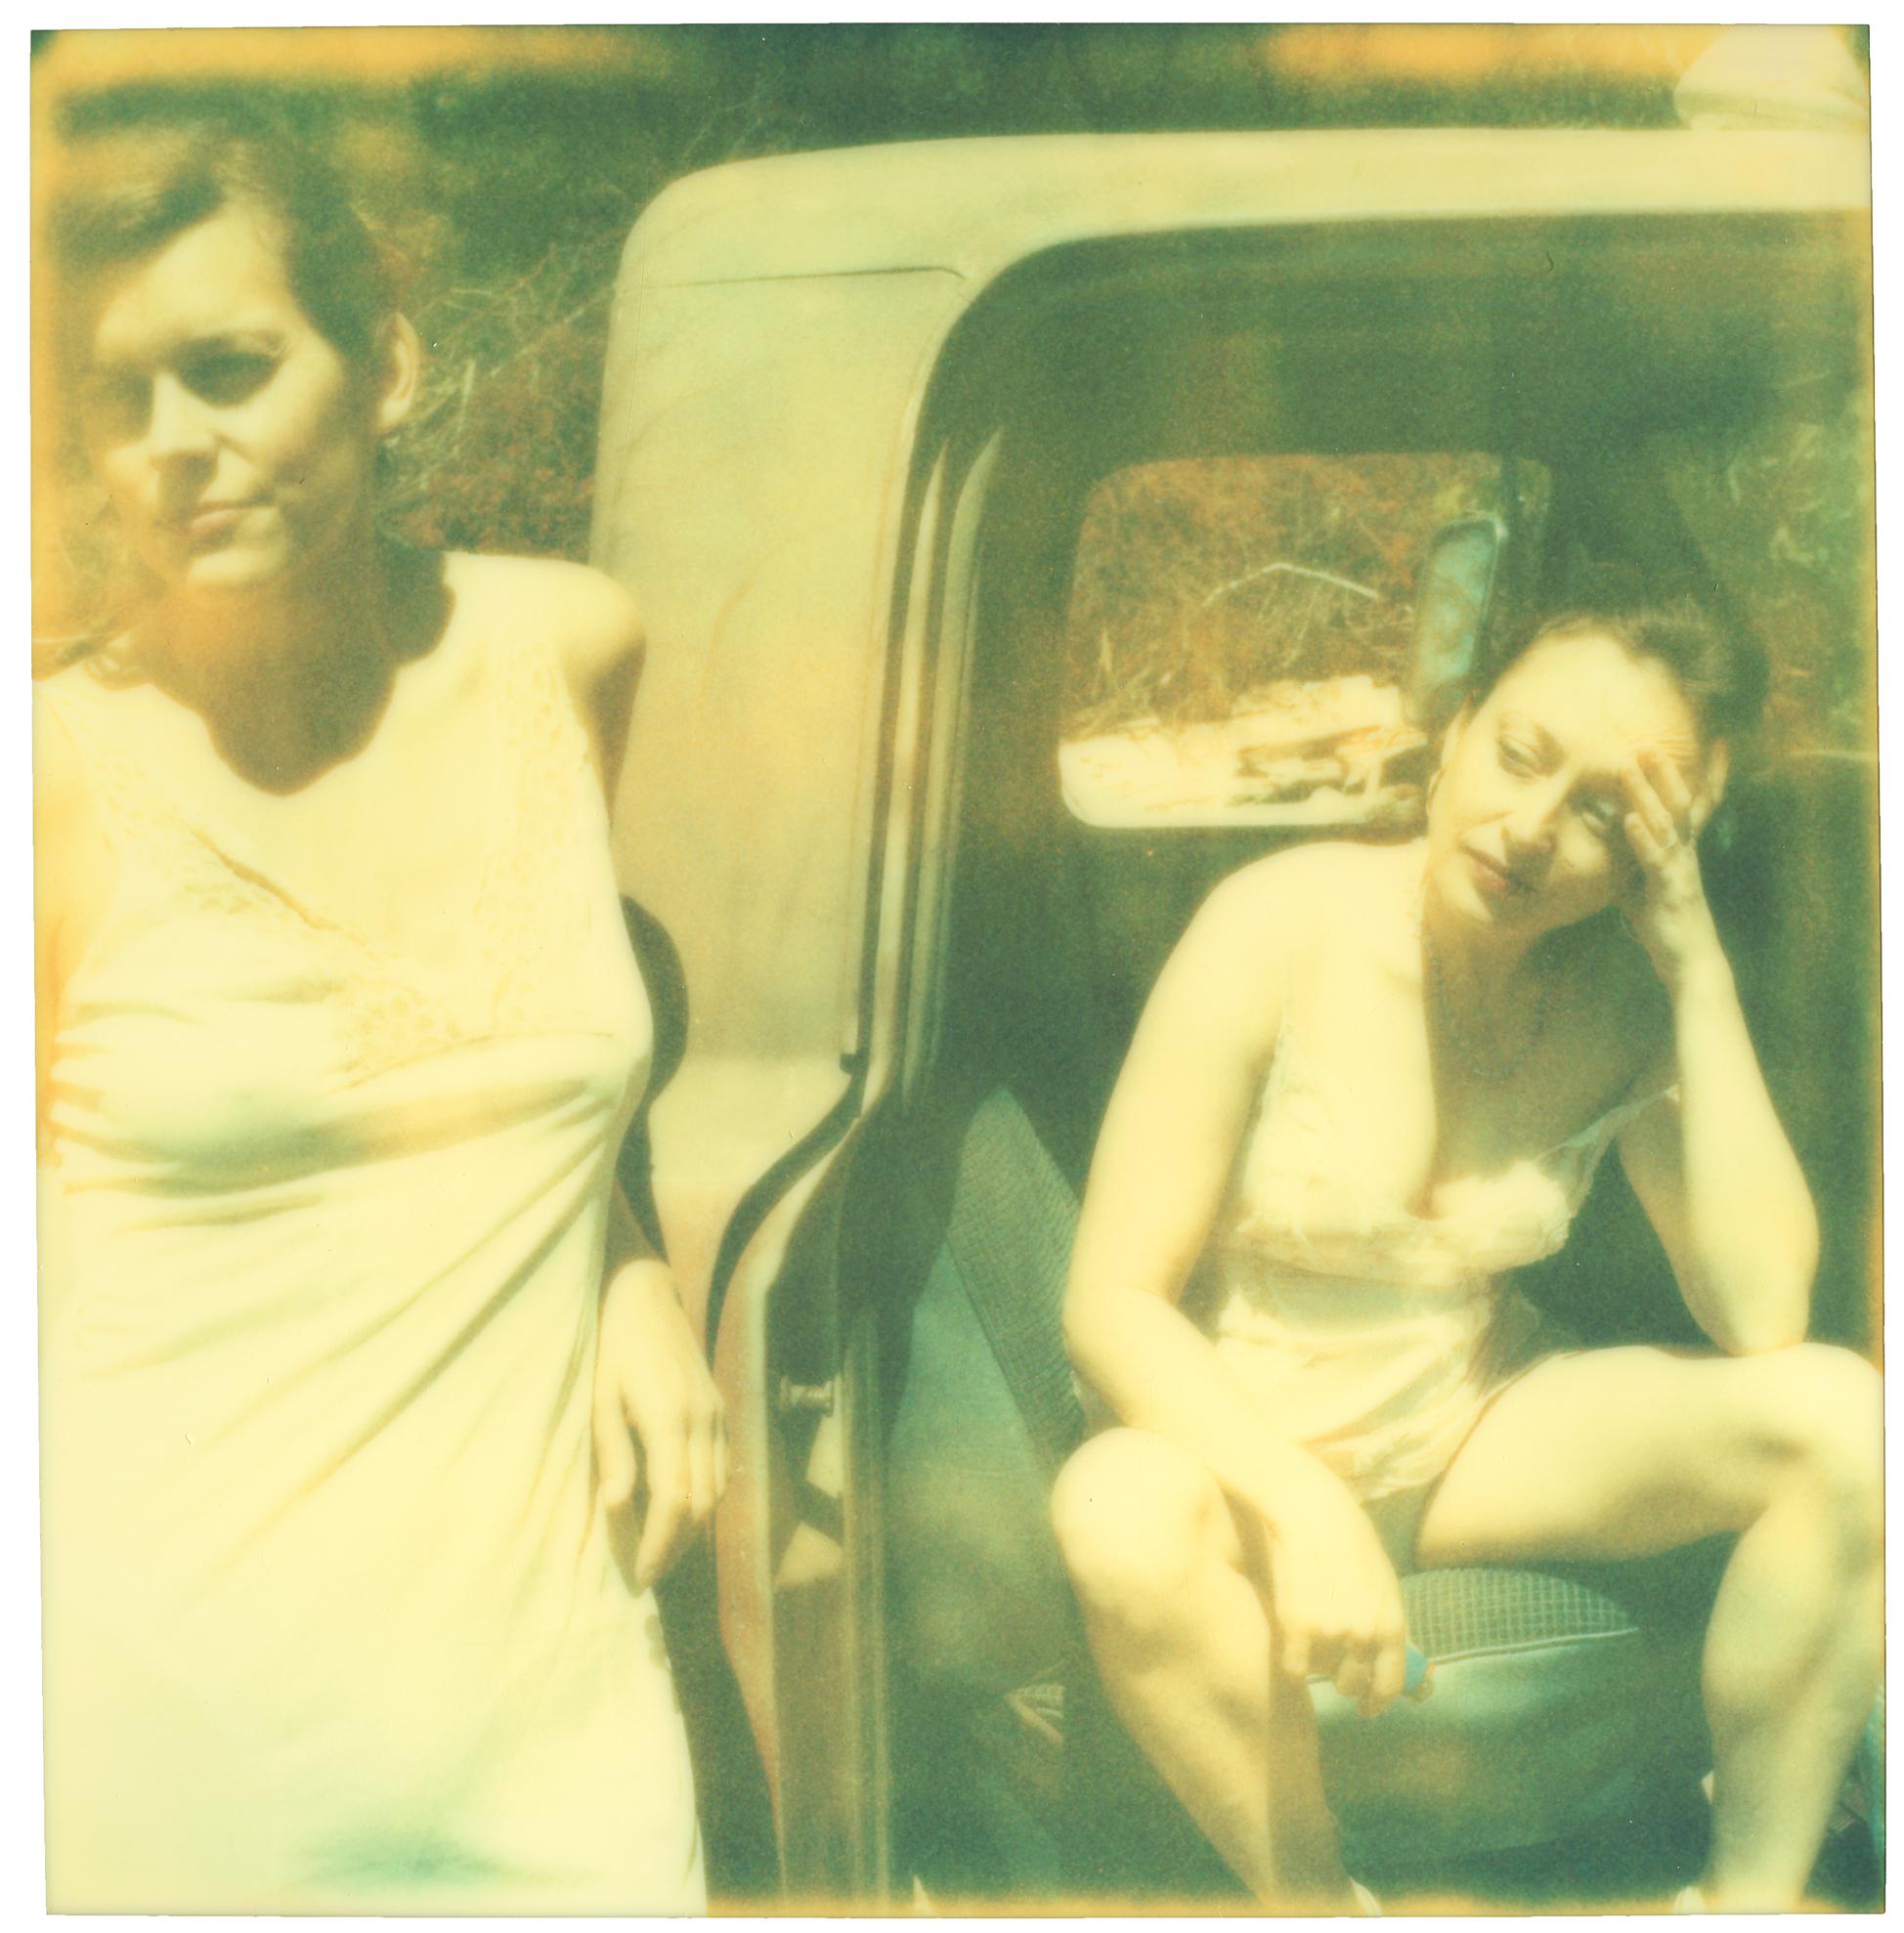 Untitled (Cathy and Shannon) - Contemporary, 21st Century, Polaroid